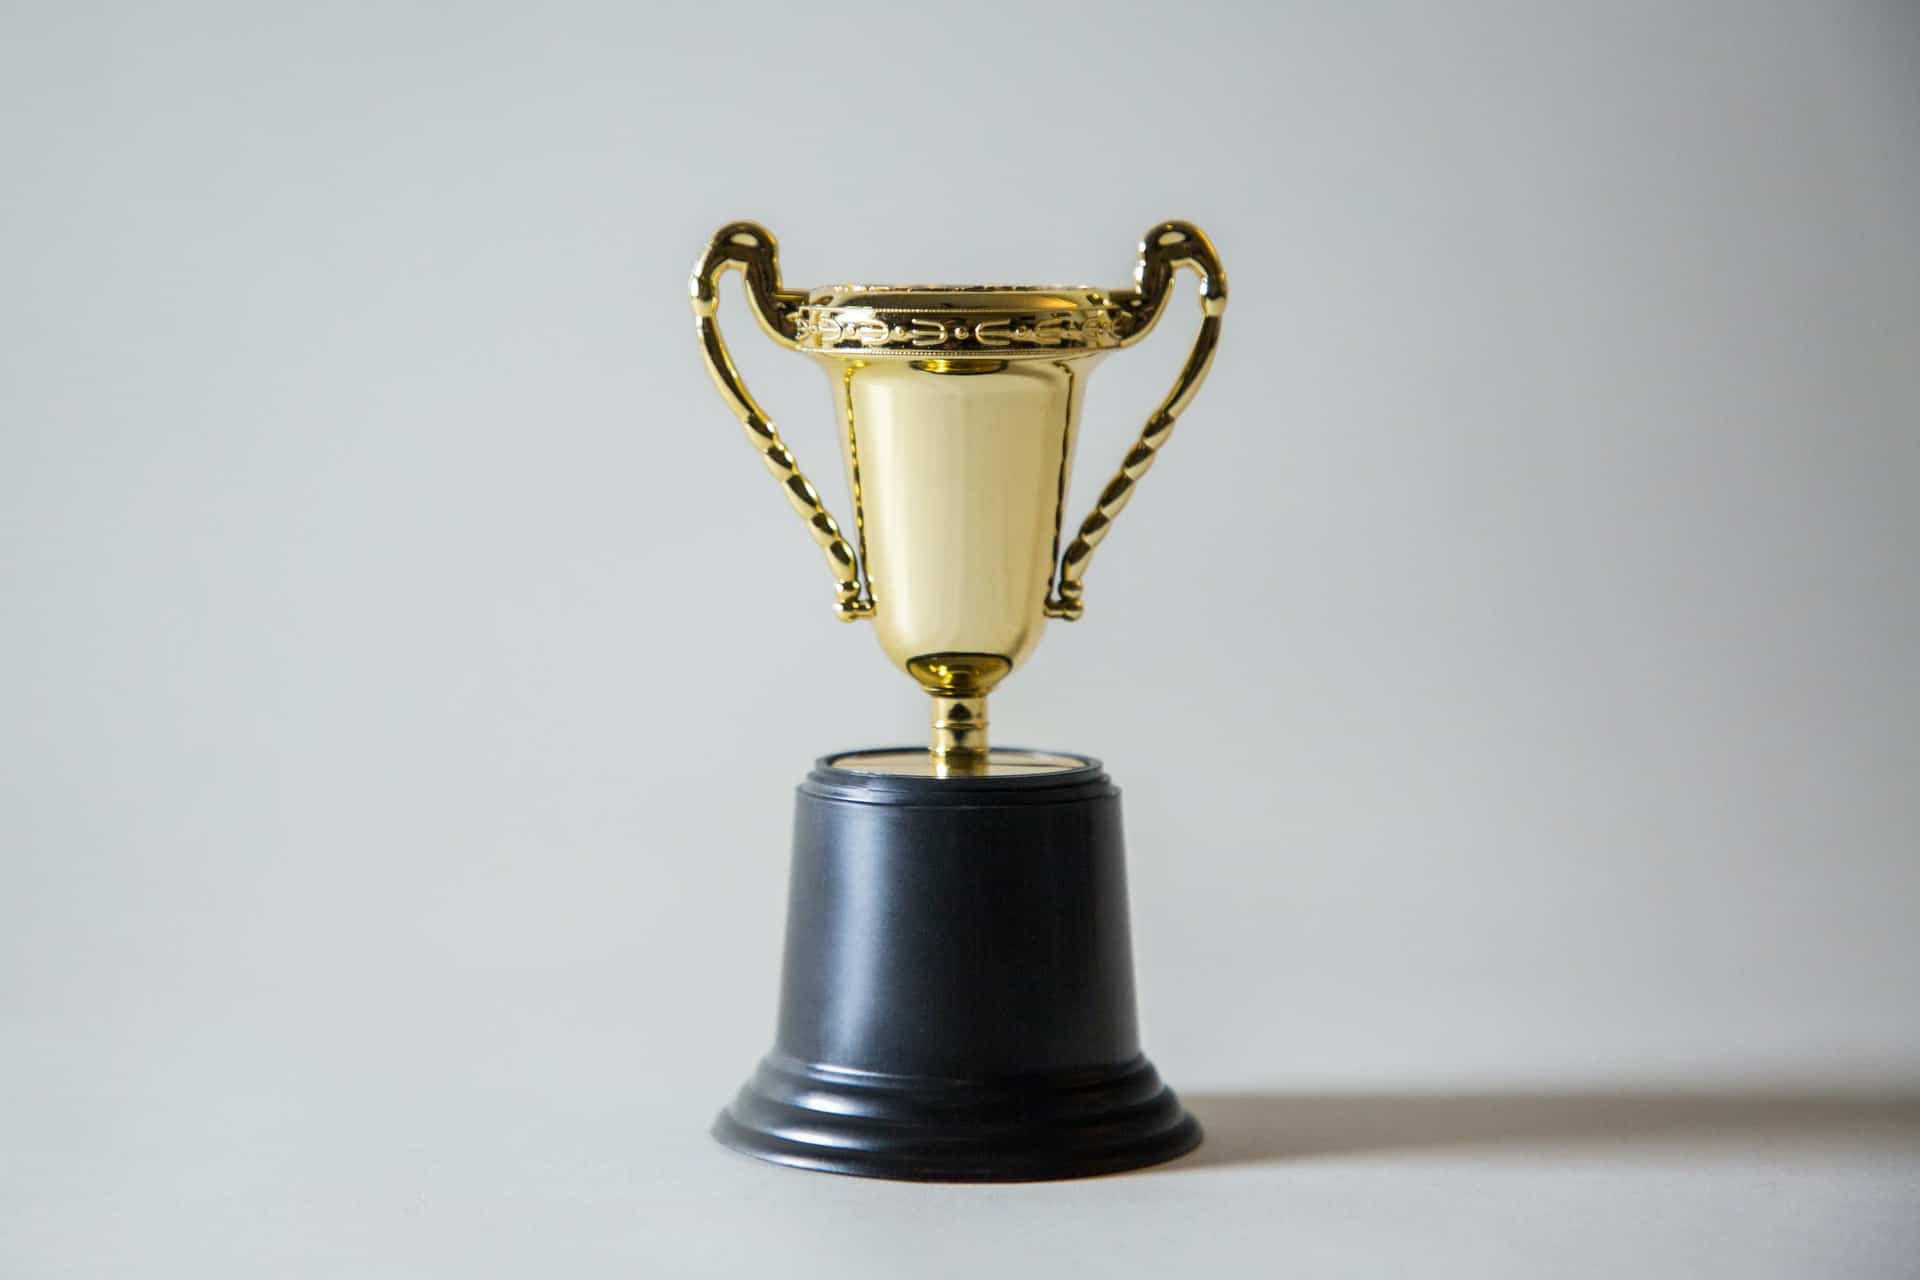 Small plastic trophy